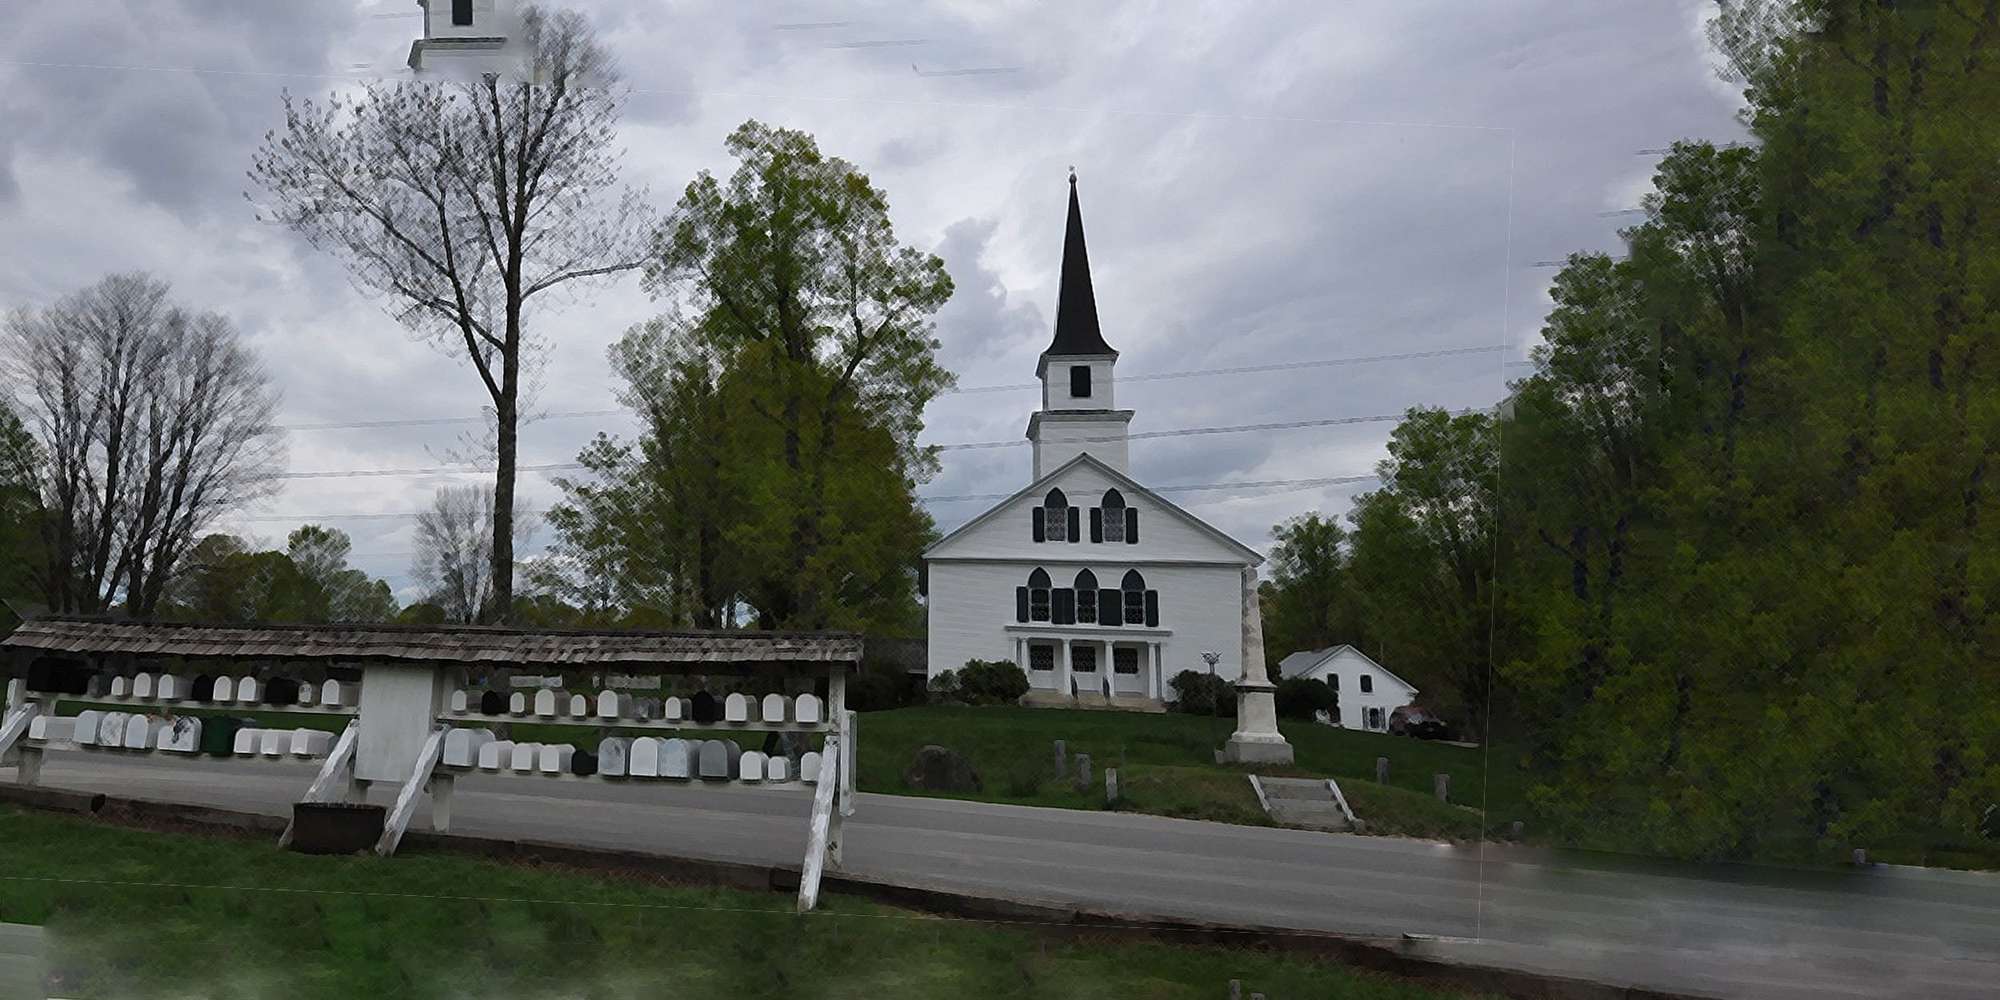 A photo of the Community Church and Post Office in Nelson, New Hampshire